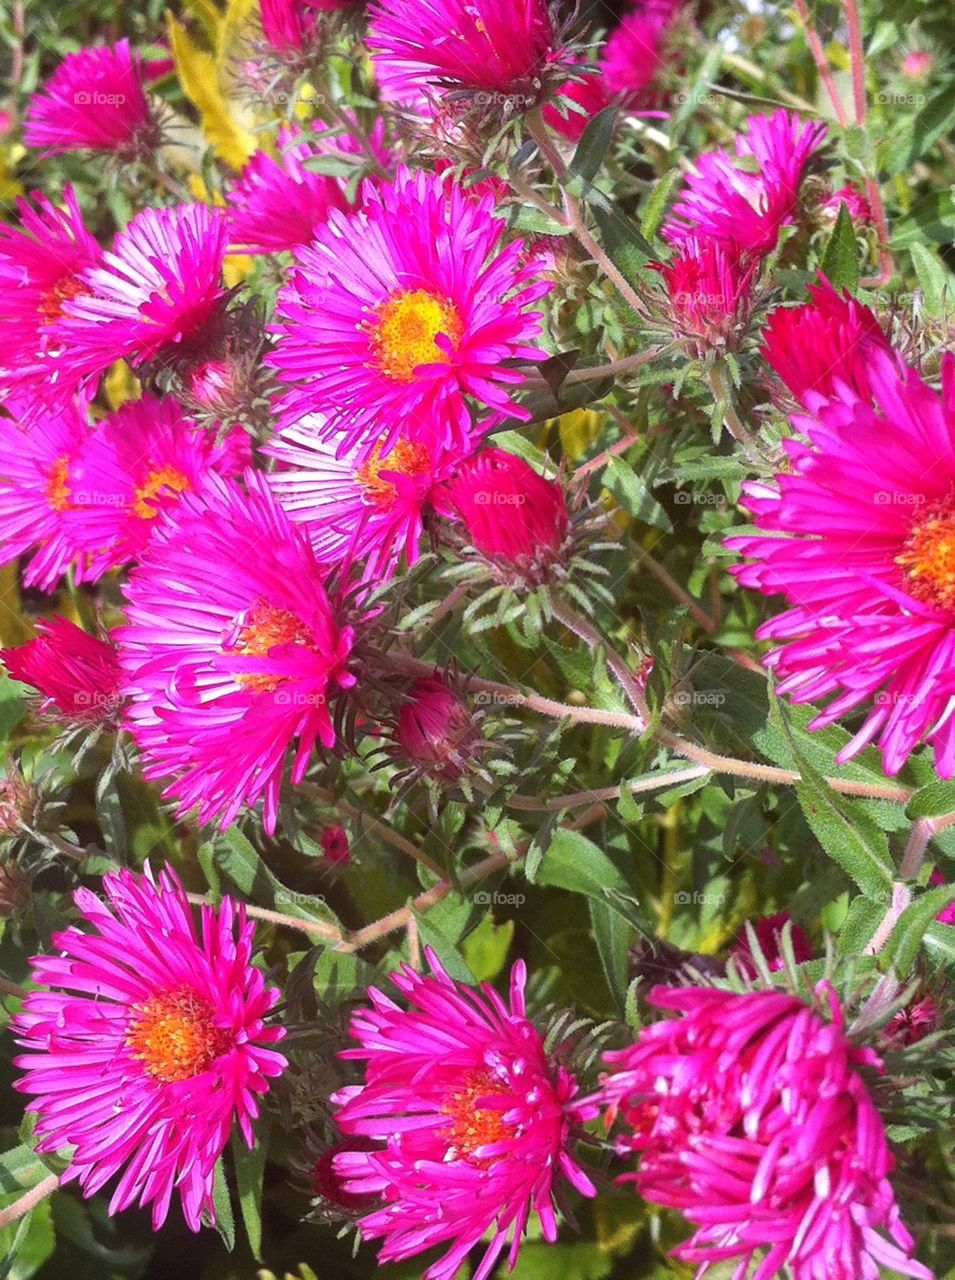 A bush full of bright pink flowers with yellow centers